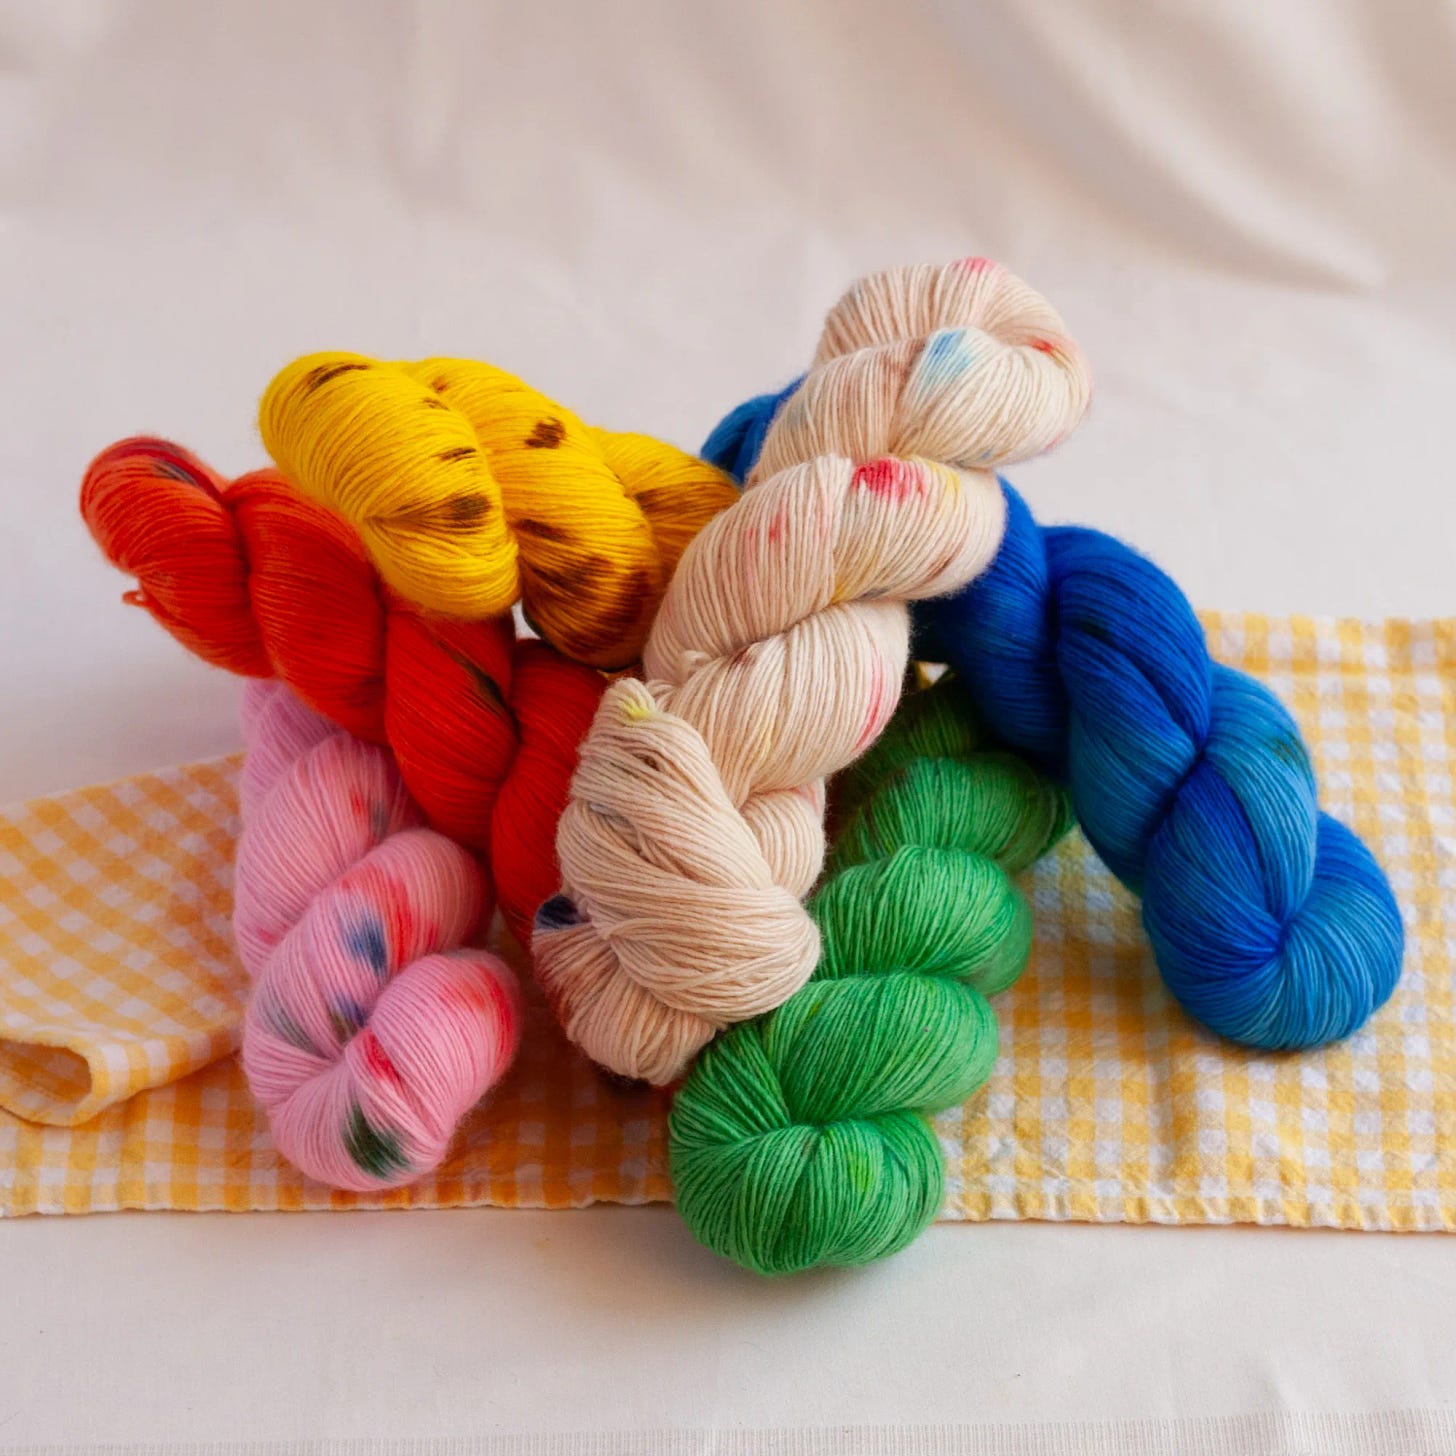 A pile of hand dyed yarn thrown casually on a gingham cloth. The yarns are bright red, yellow, blue, pink, and white with colourful speckles. 